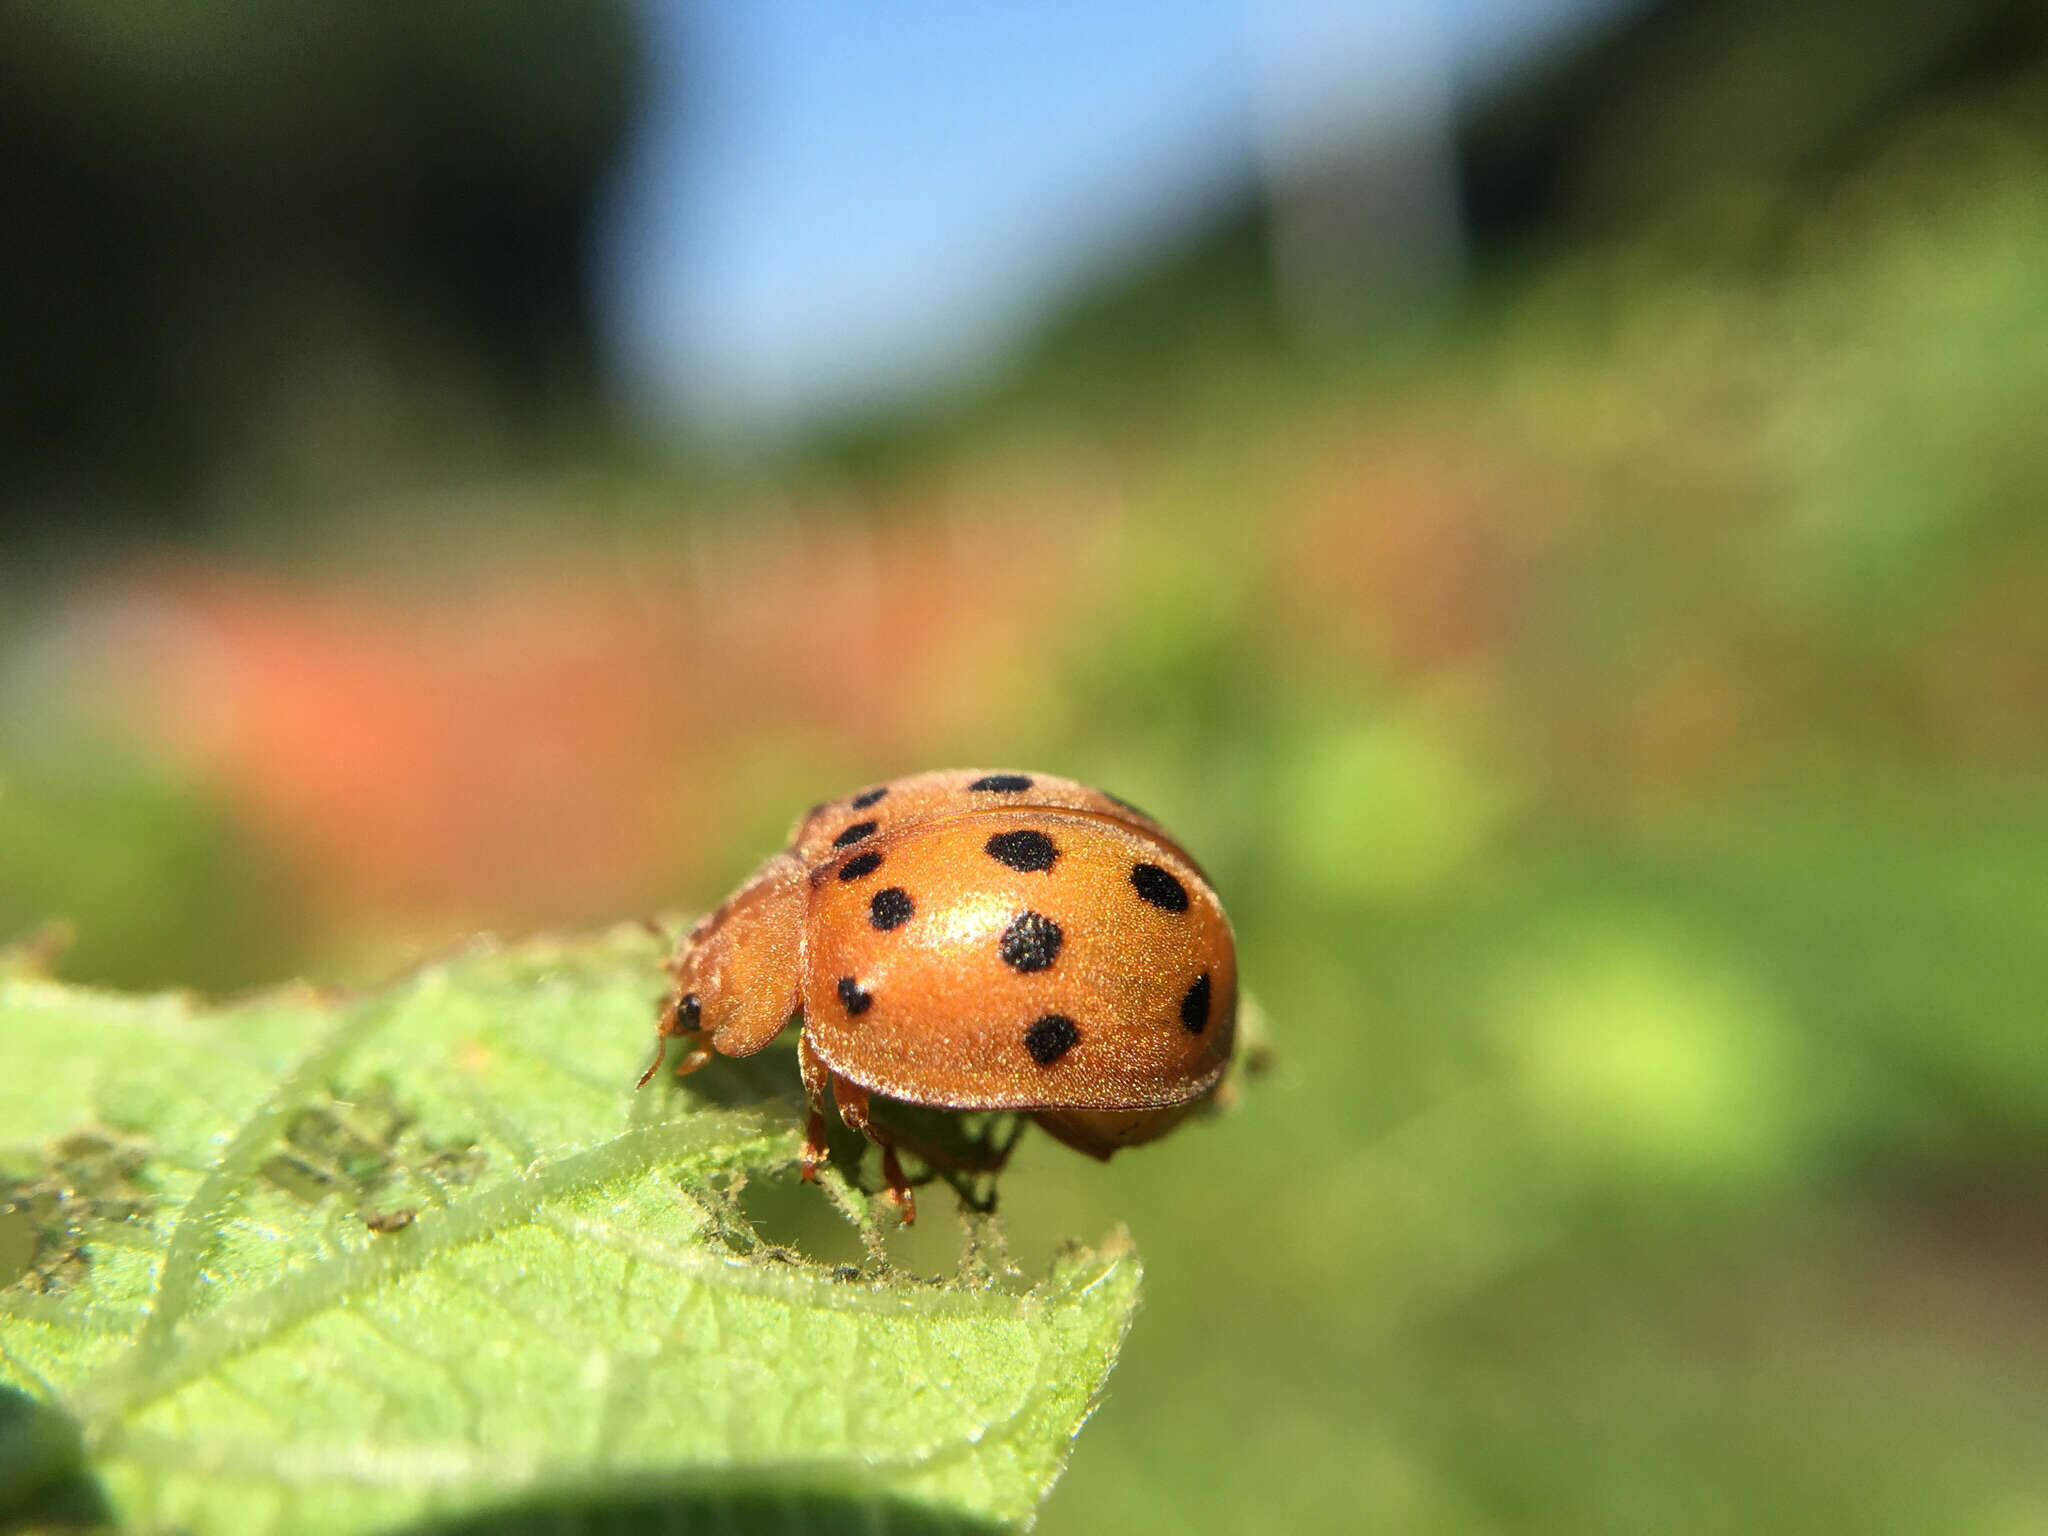 Image of Mexican bean beetle